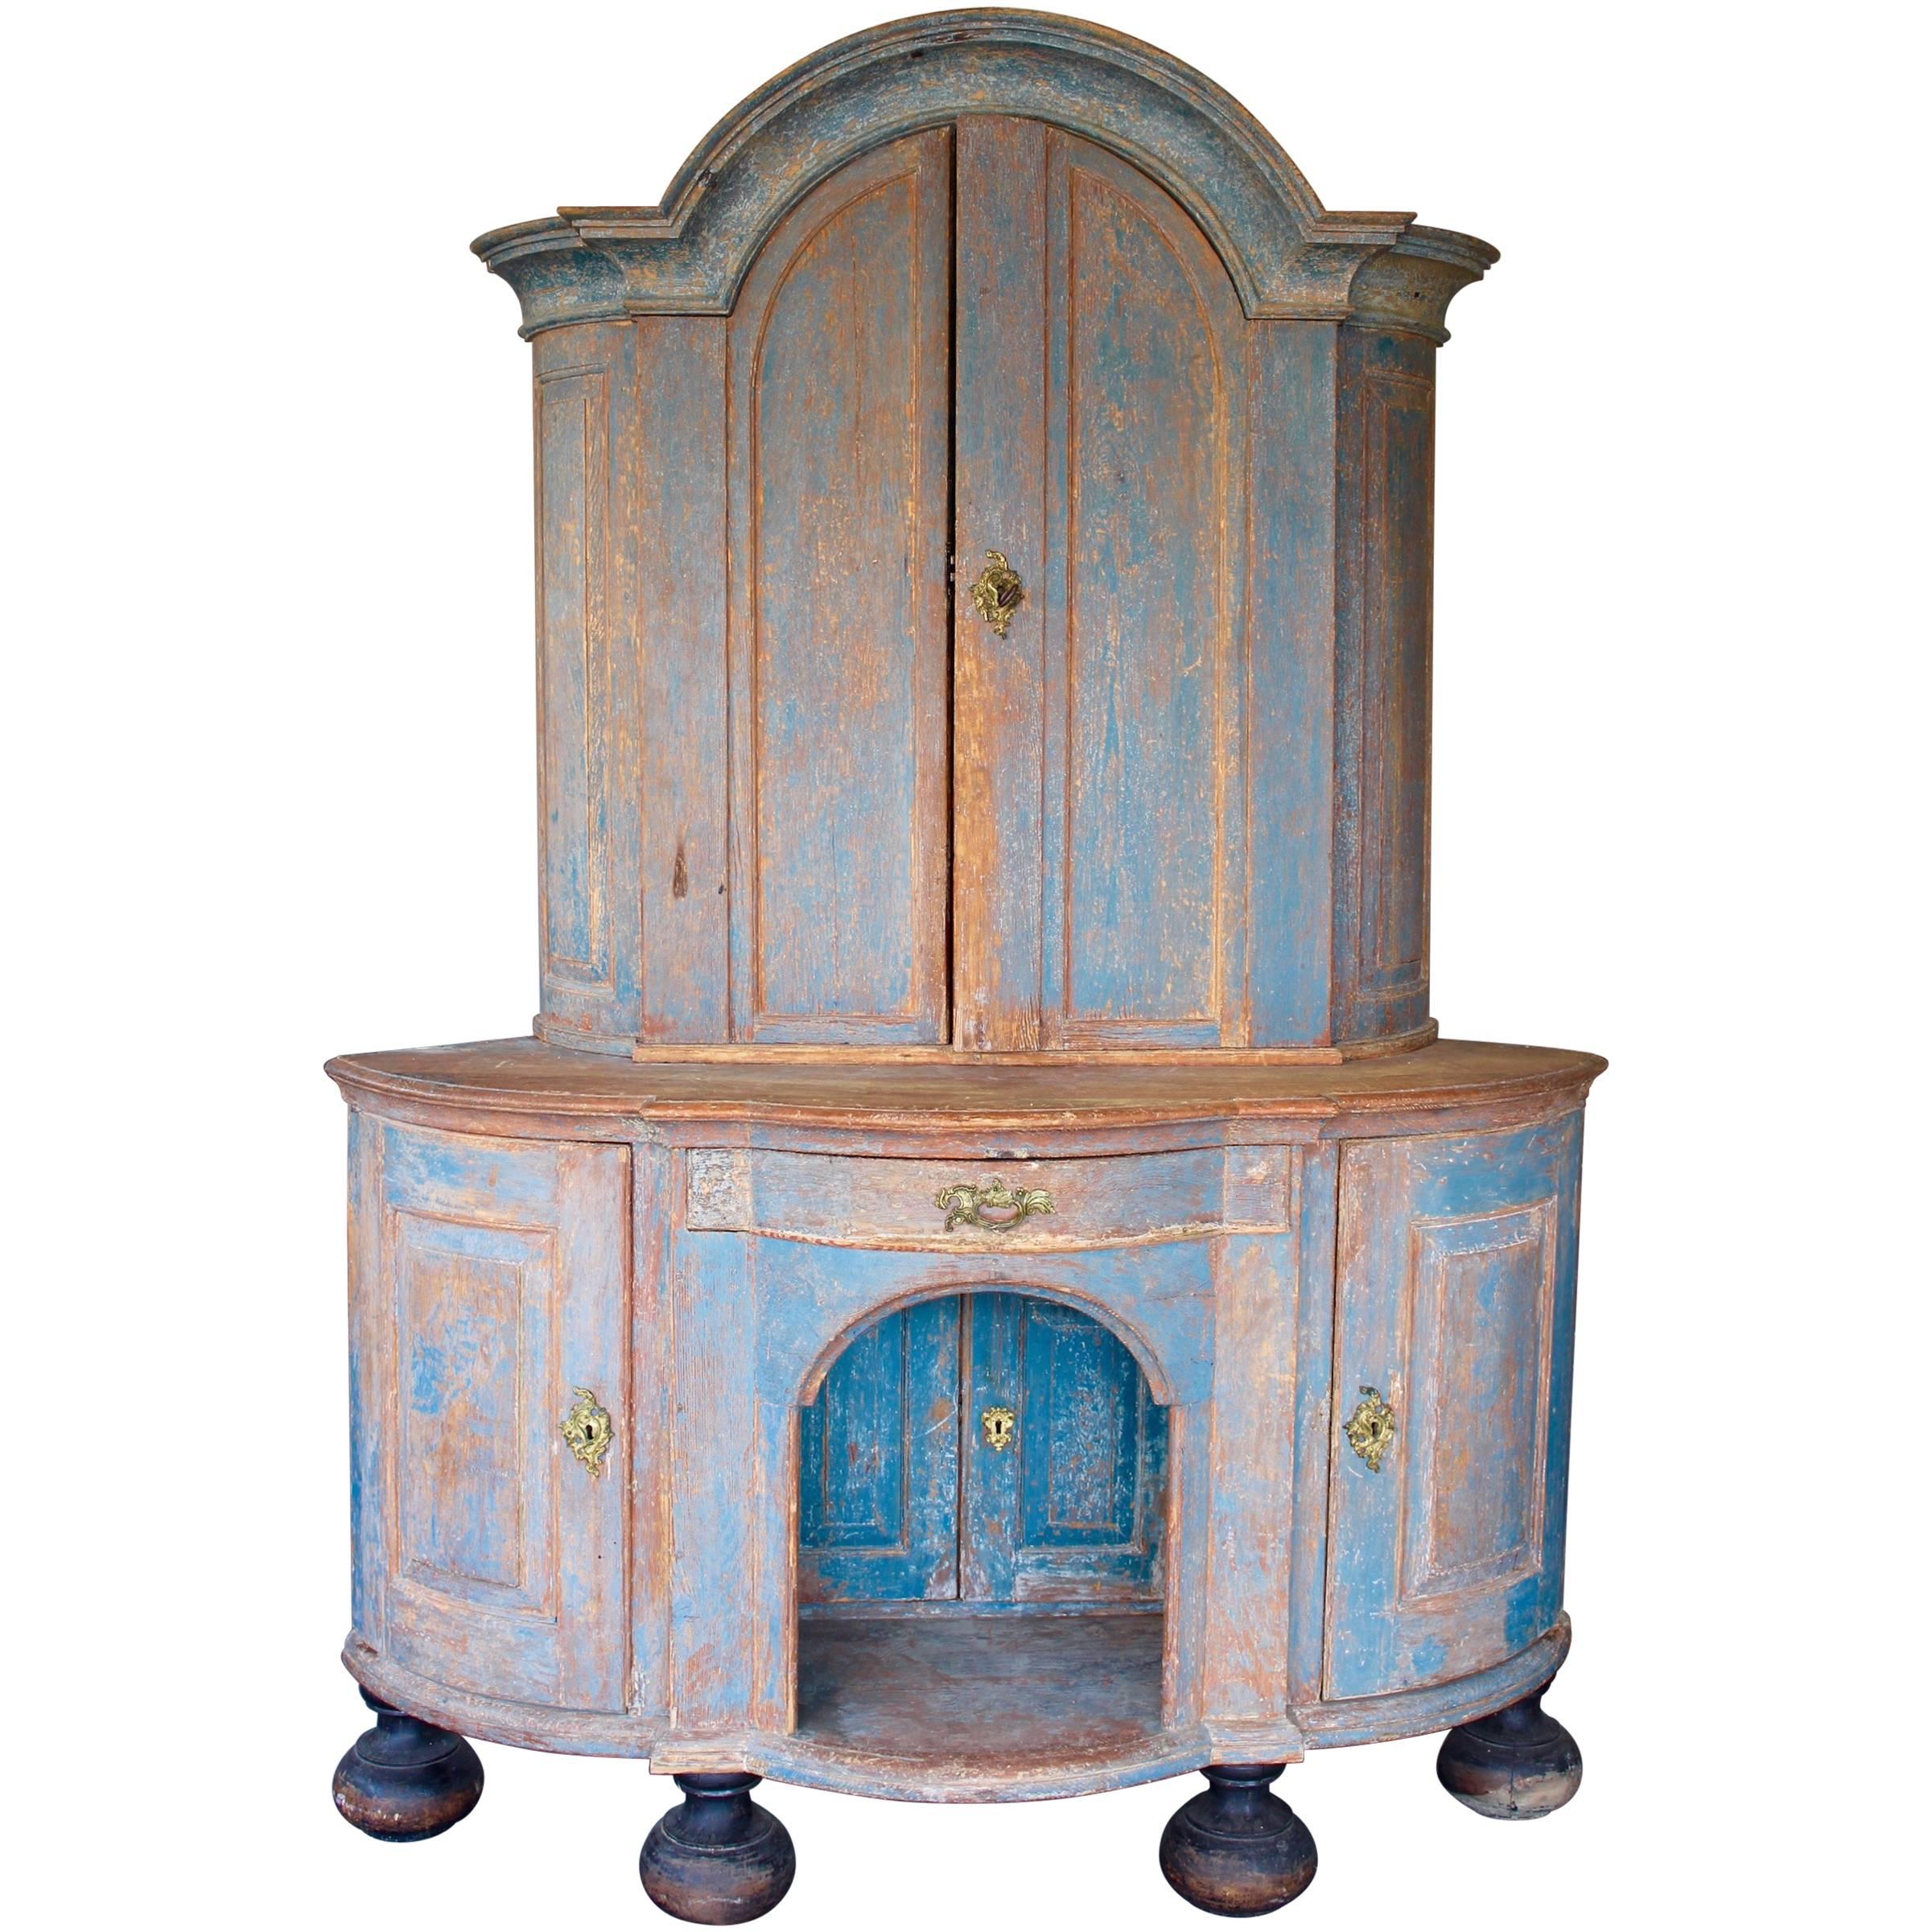 Curved form with shaped and molded cornice, four doors with internal shelves, one drawer and a recessed shelf, blue paint.